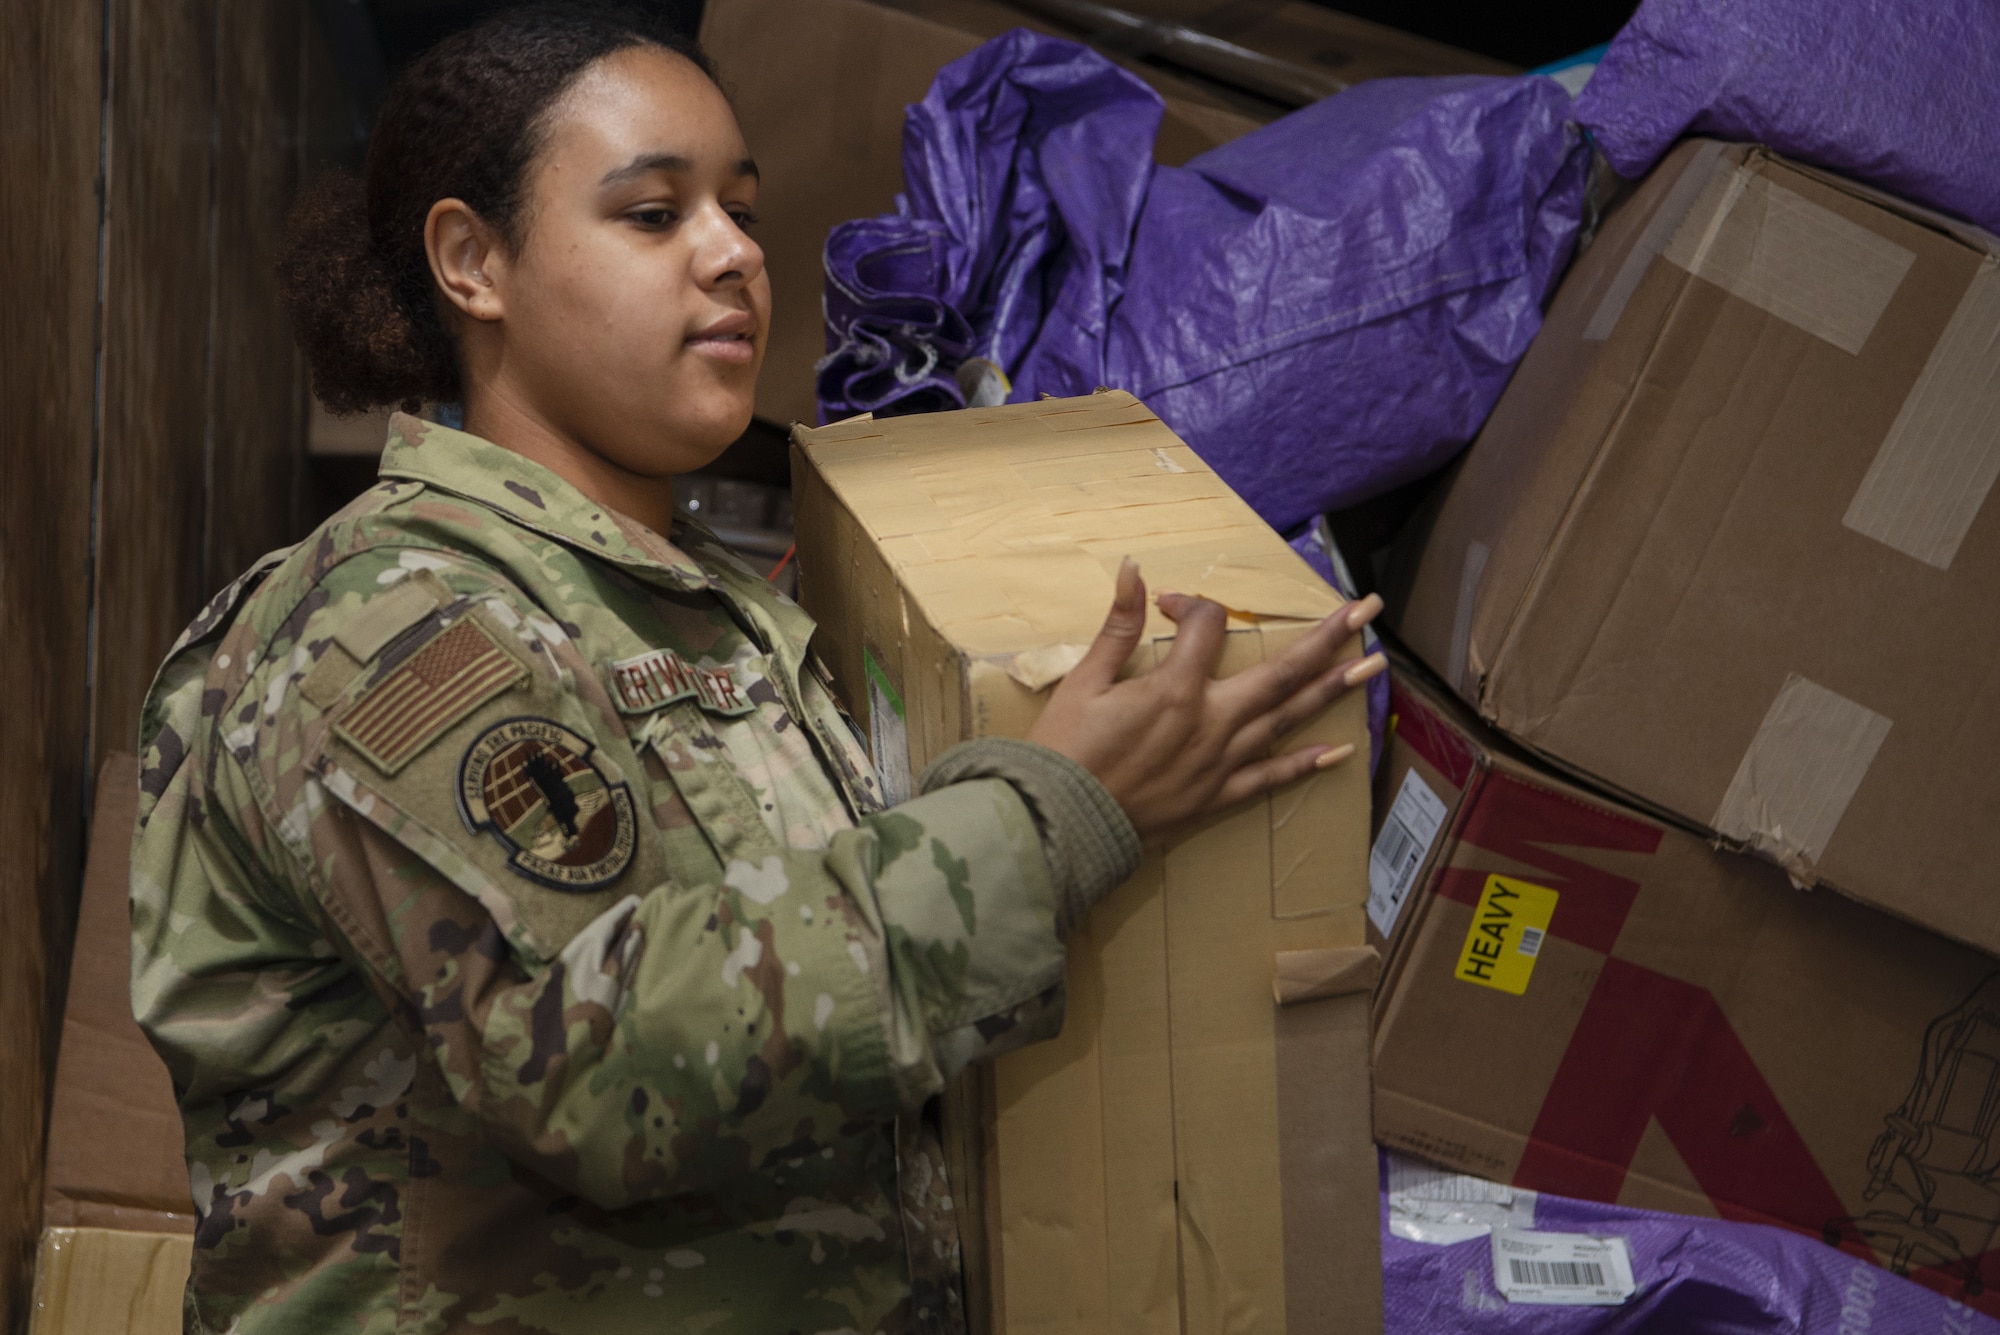 Airman 1st Class Sharia Meriweather, Pacific Air Forces Air Postal Squadron mail processing clerk, moves packages onto a conveyer belt as part of a mail sorting and inspection process Dec. 8, 2021, at Yokota Air Base, Japan. Members of the PACAF AIRPS transportation flight at Yokota Air Base integrate United States Postal Service and Government of Japan inspection policies into mail inspections for all mail destined for Yokota Air Base and Misawa Air Base. The squadron oversees operations for a transportation flight and 11 locations across the Pacific to serve more than 355,000 patrons across U.S. Indo-Pacific Command.